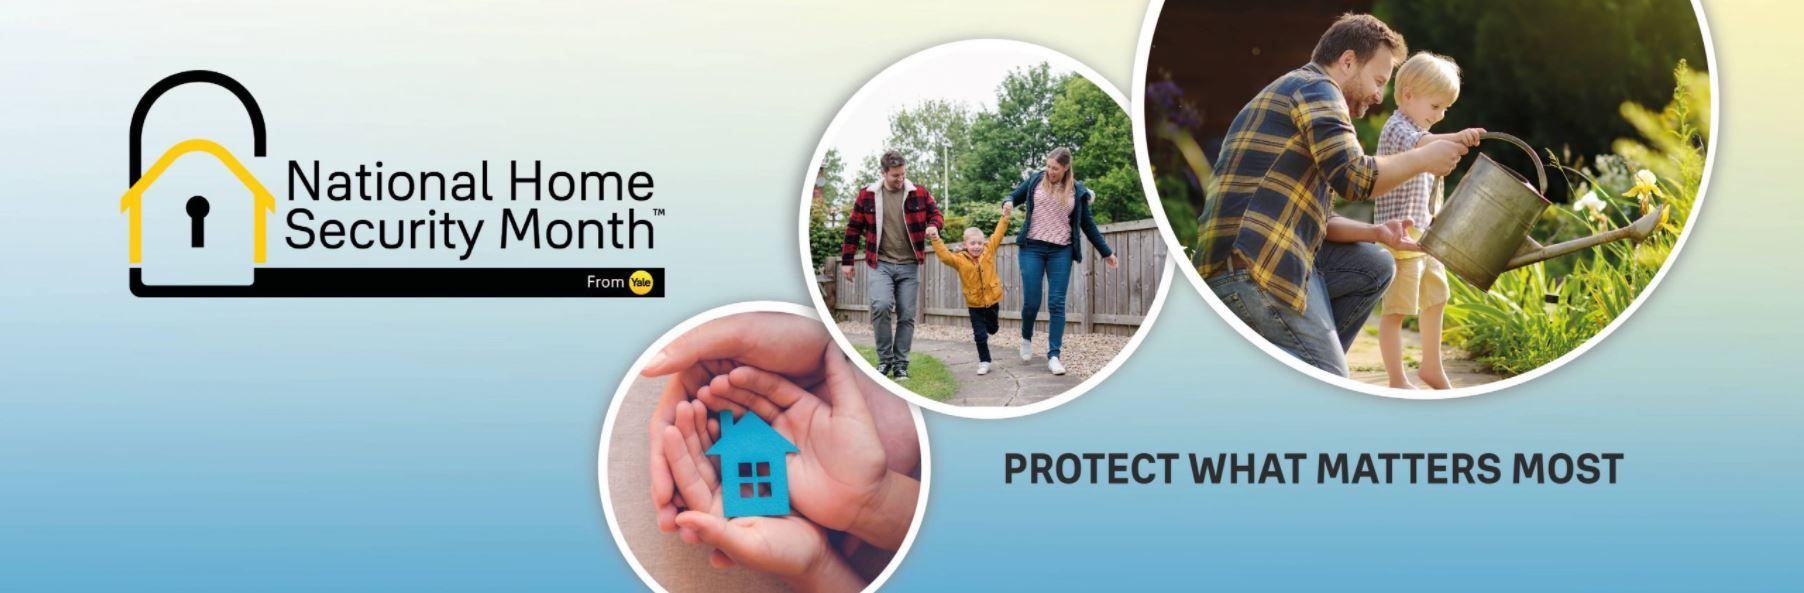 Keeping your home safe and secure